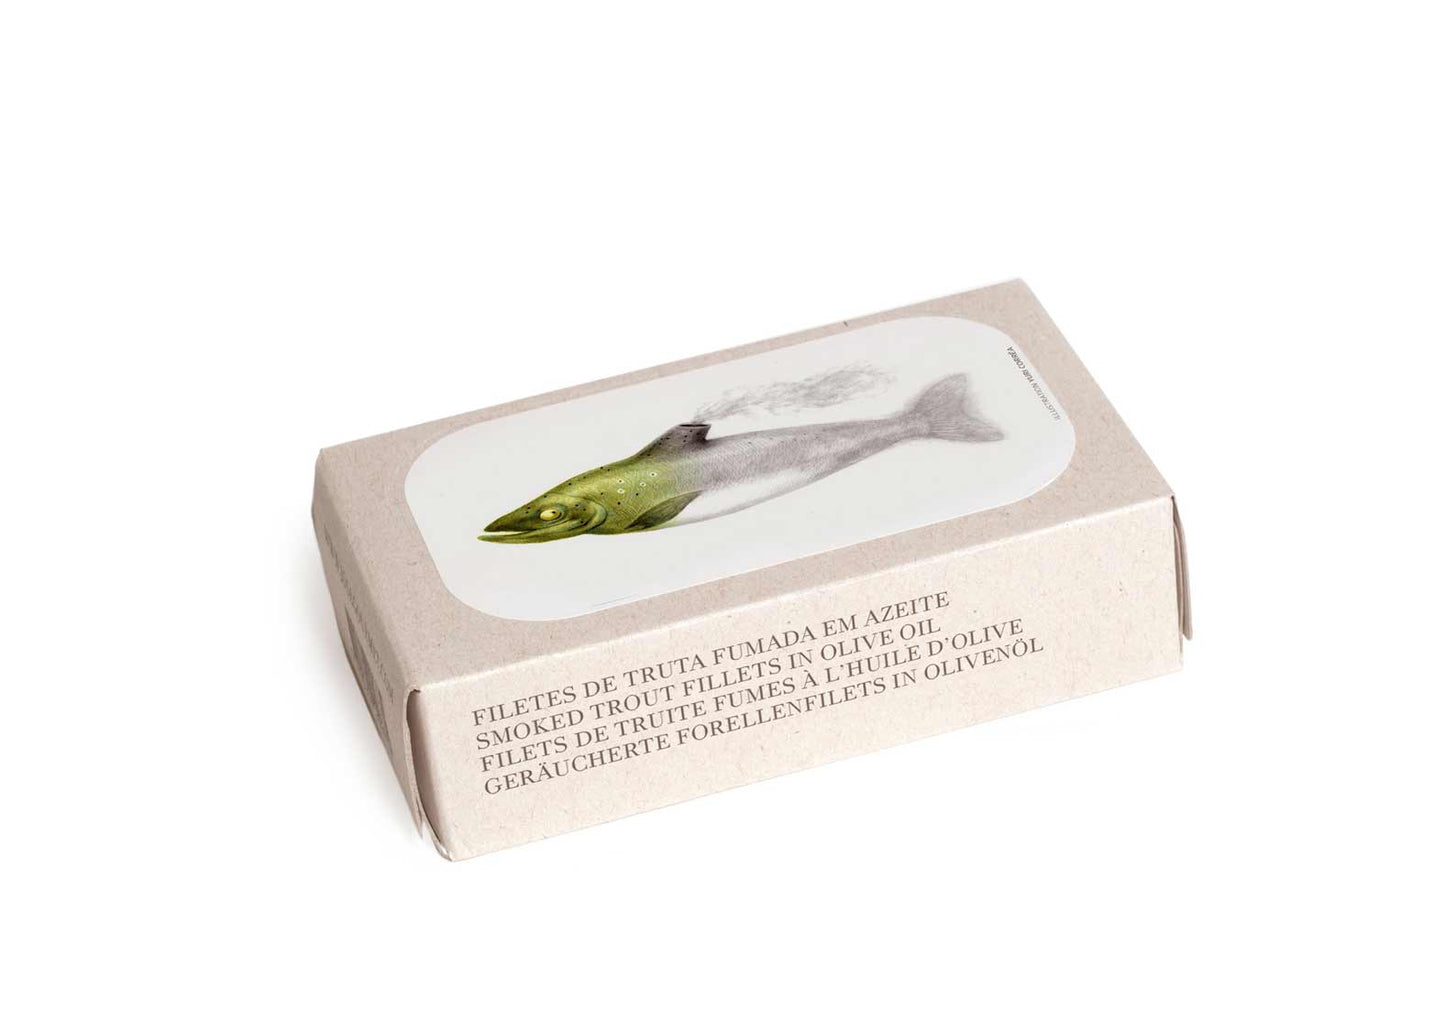 Jose Gourmet 'Smoked Trout Fillets in Olive Oil',  Portugal